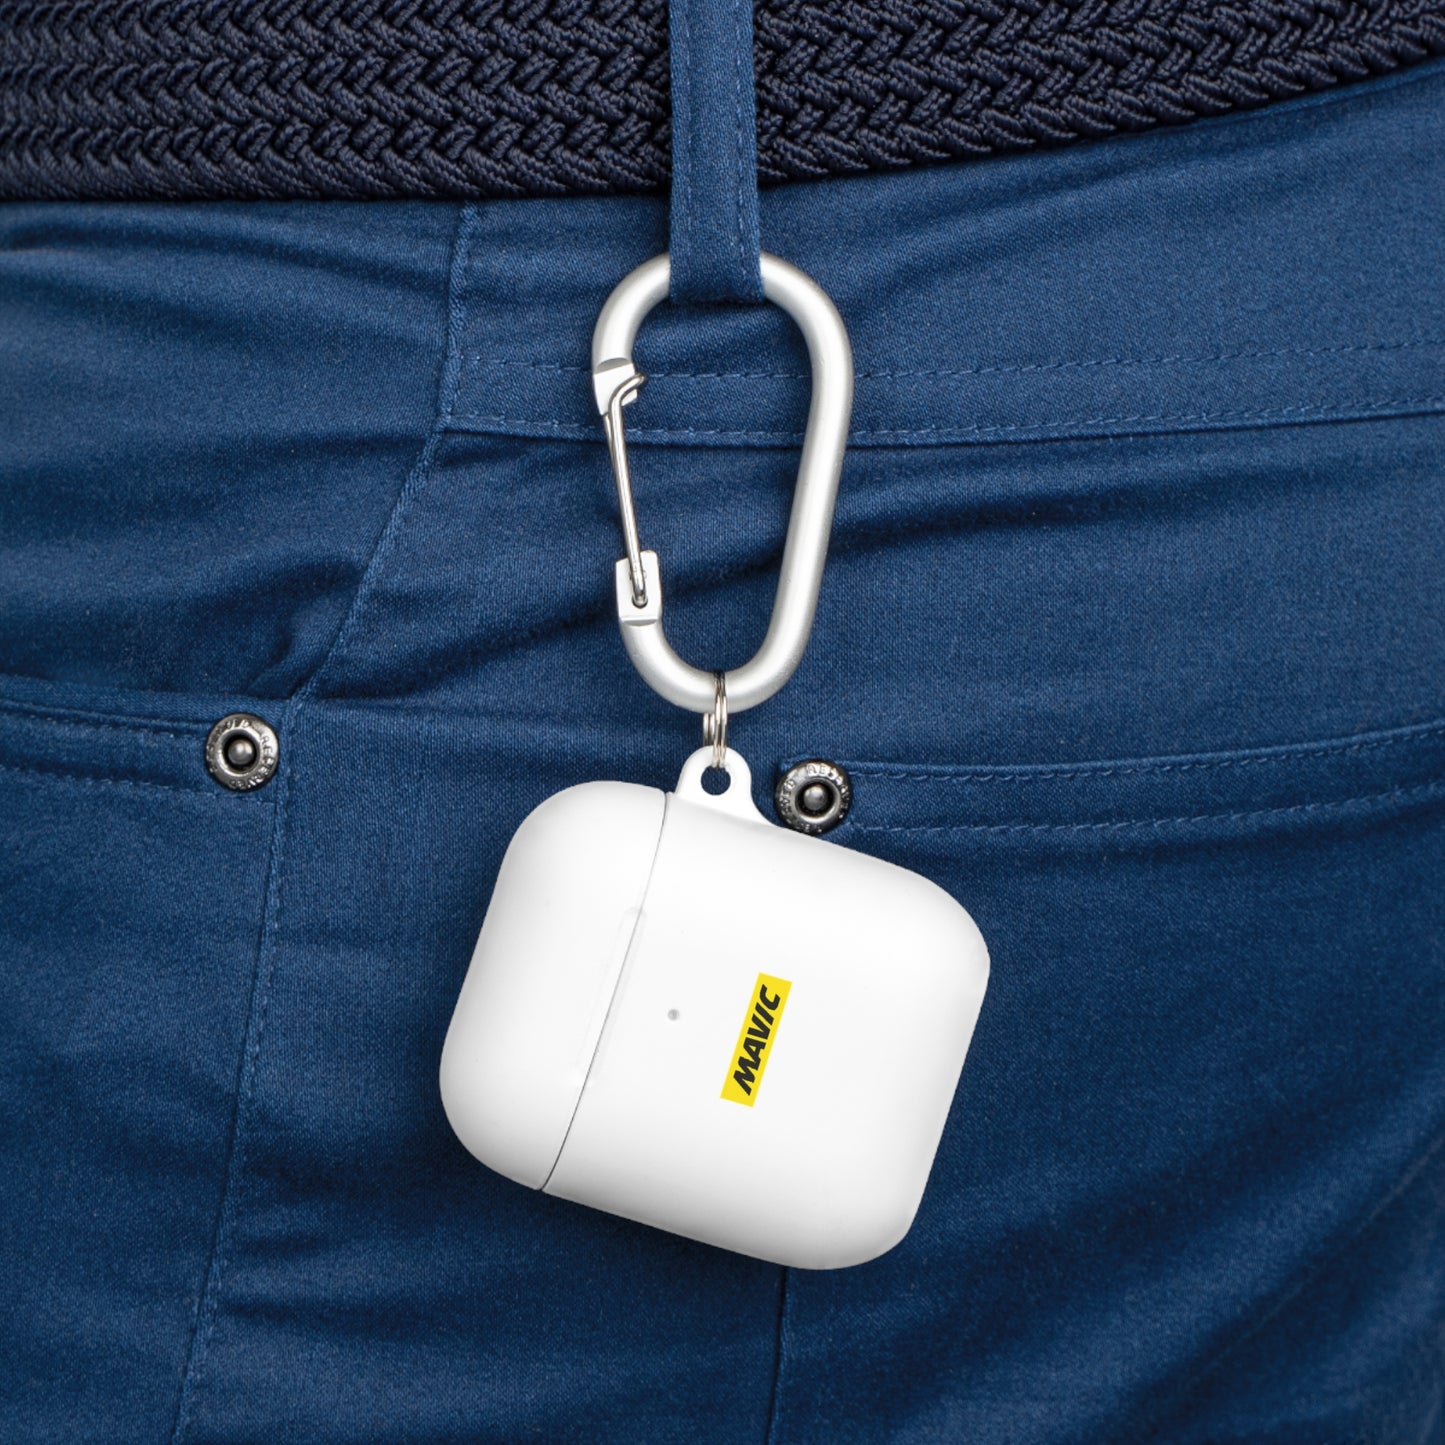 Mavic AirPods and AirPods Pro Case Cover